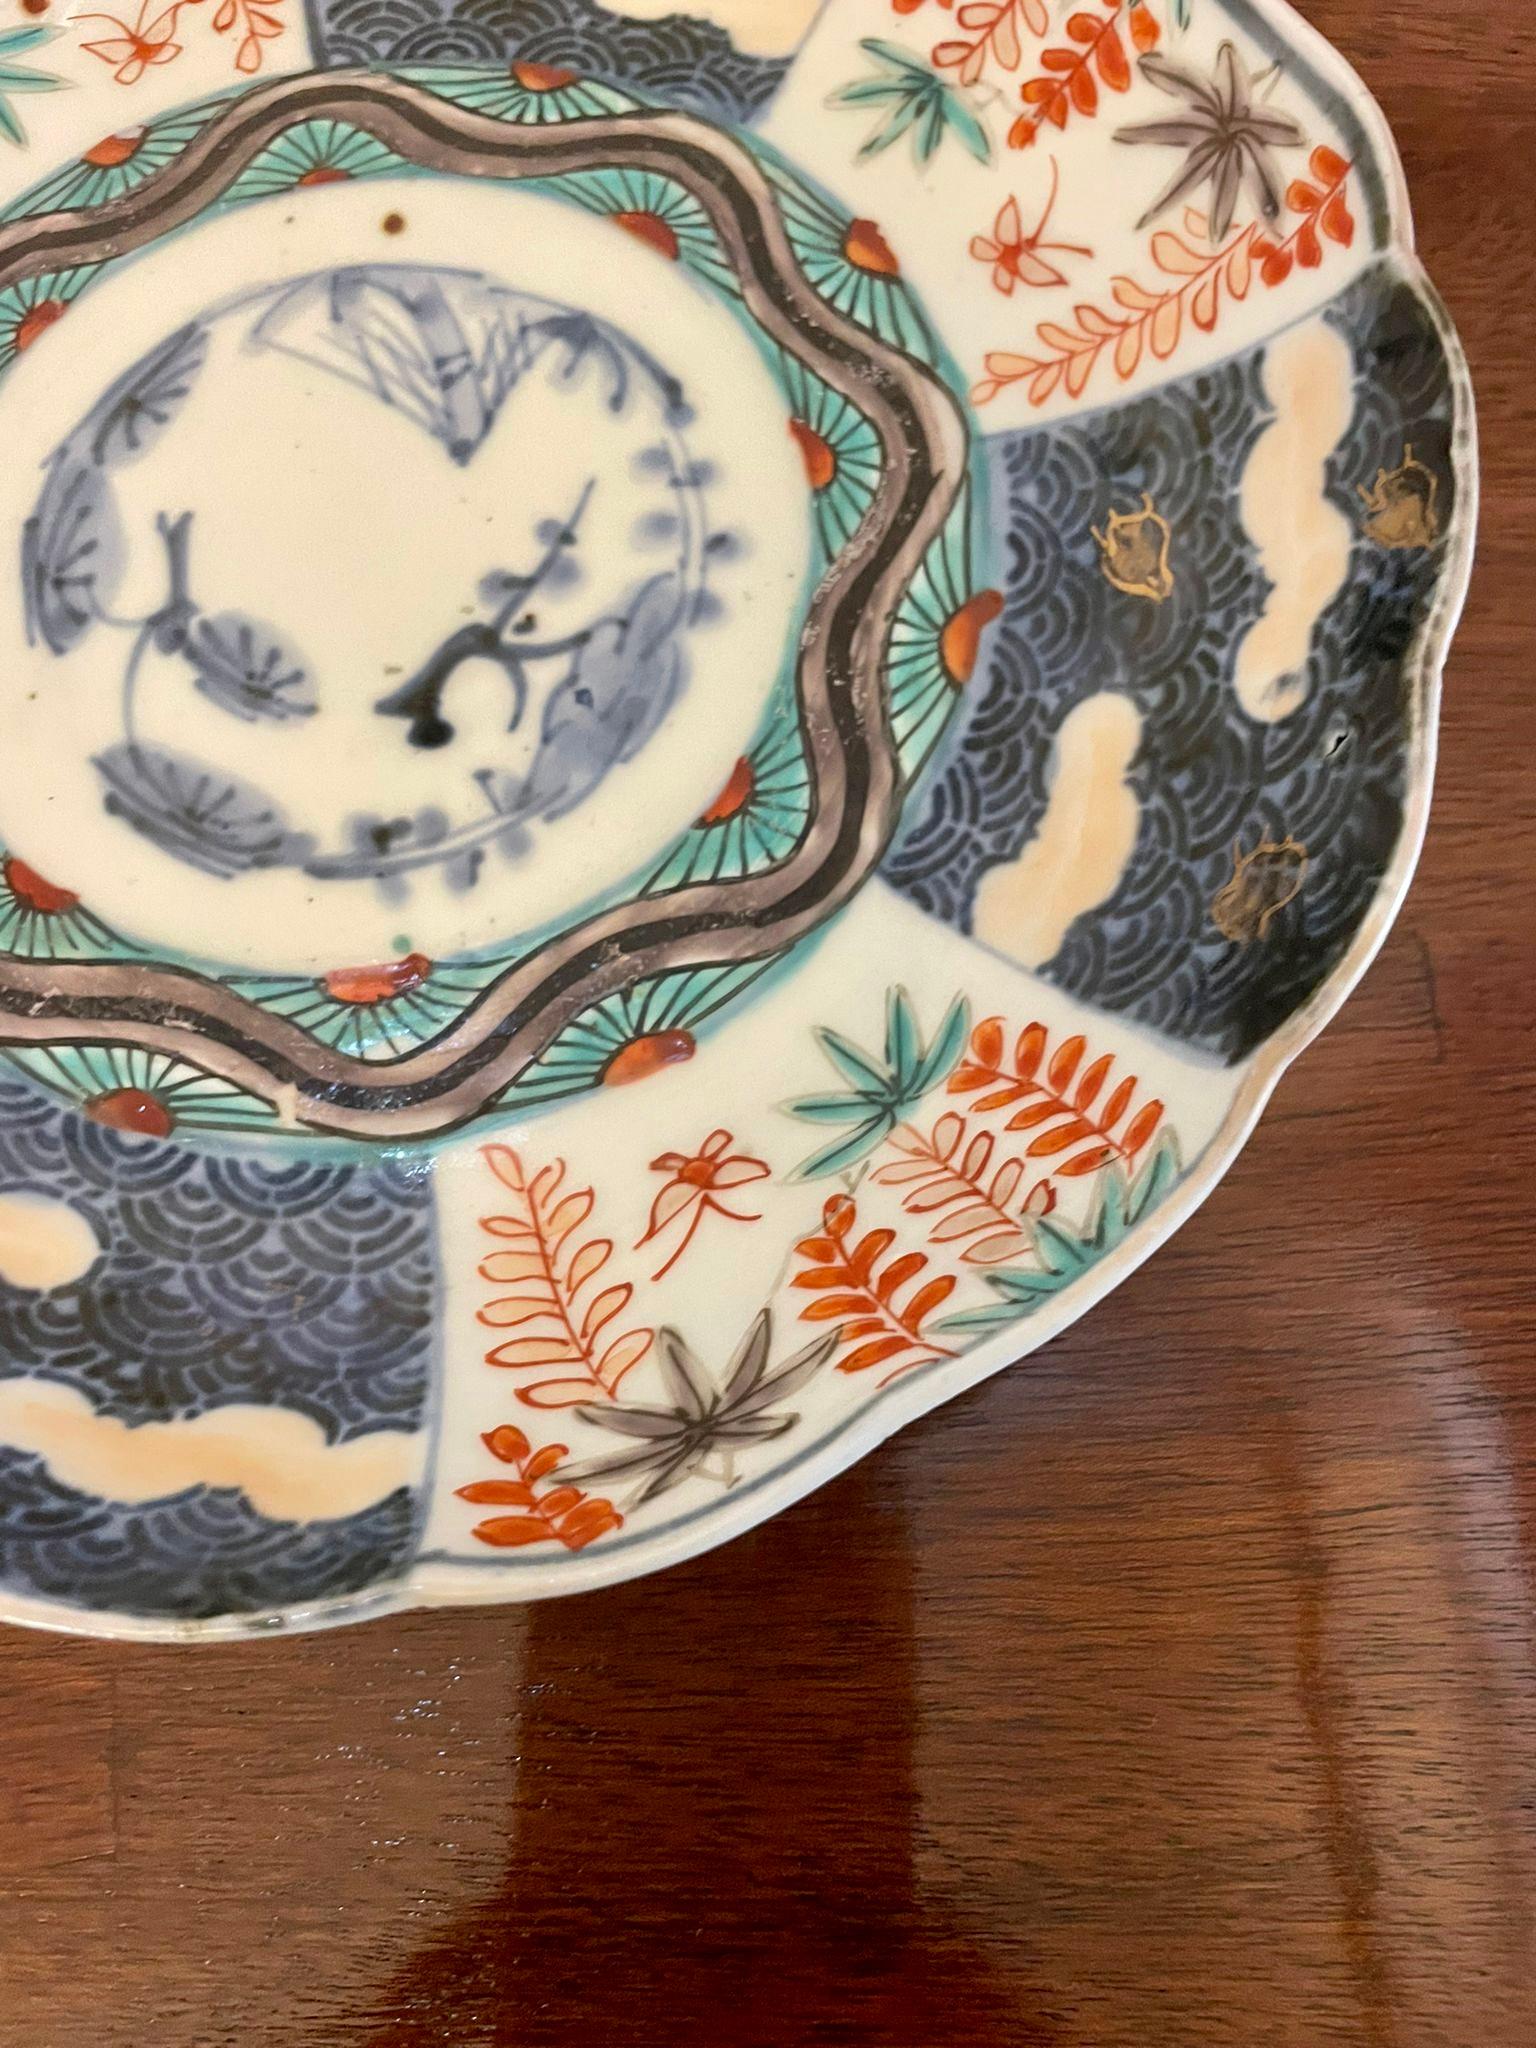 Antique quality Japanese Imari plate having a scalloped edge with wonderful hand painted panels in red, blue, green, white and gold colours 


In lovely original condition


Dimensions:
Height 3.5 cm 
Width 22 cm 
Depth 22 cm


Dated 1900 
